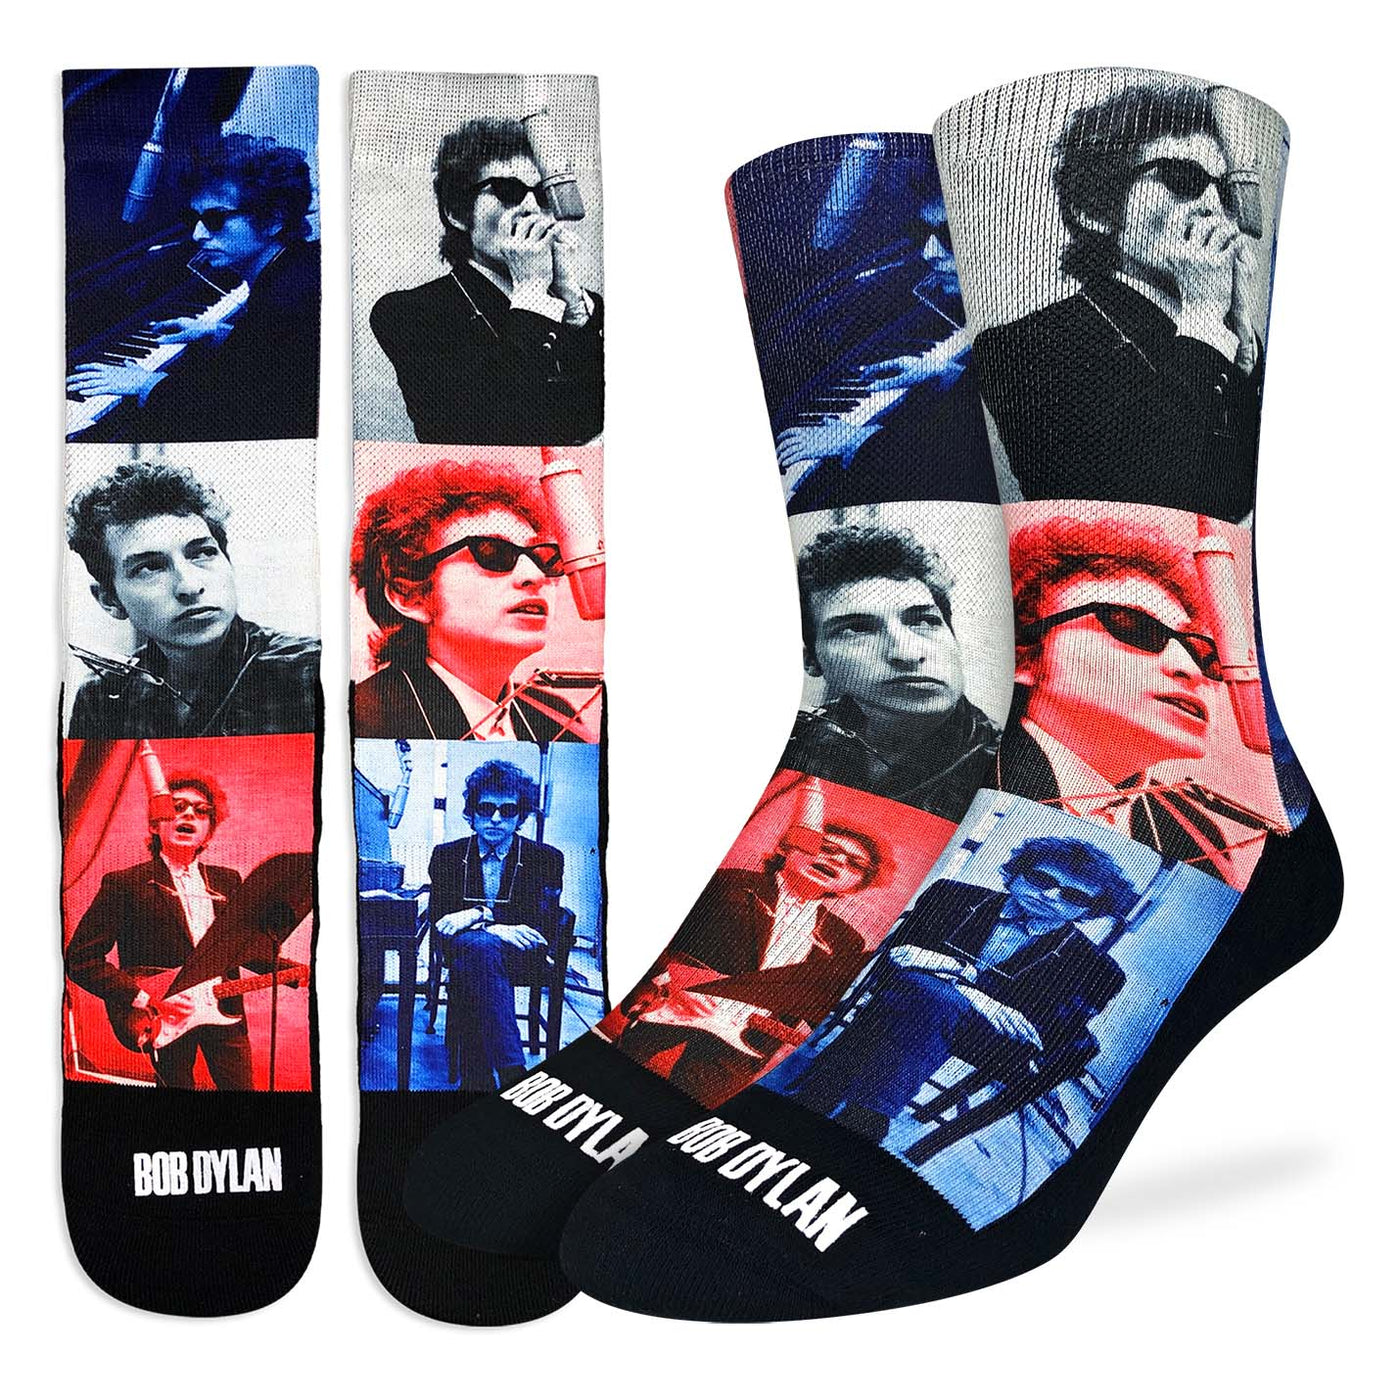 "Bob Dylan Red & Blue" Crew Socks by Good Luck Sock - Large